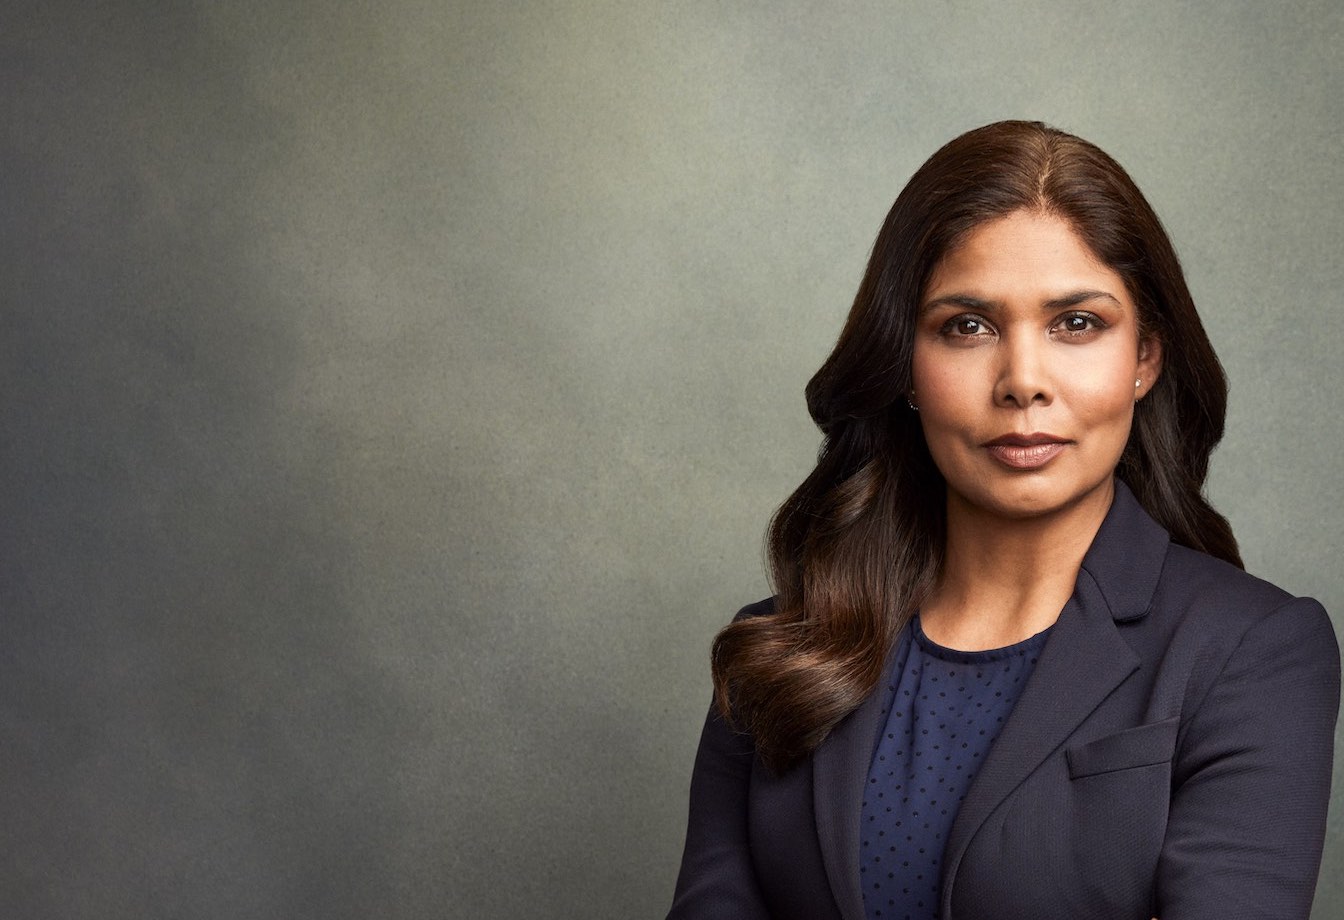 SOFIA SYED NAMED IN THE SPEAR’S RANKING OF THE BEST REPUTATION LAWYERS FOR HIGH NET WORTH INDIVIDUALS 2023.